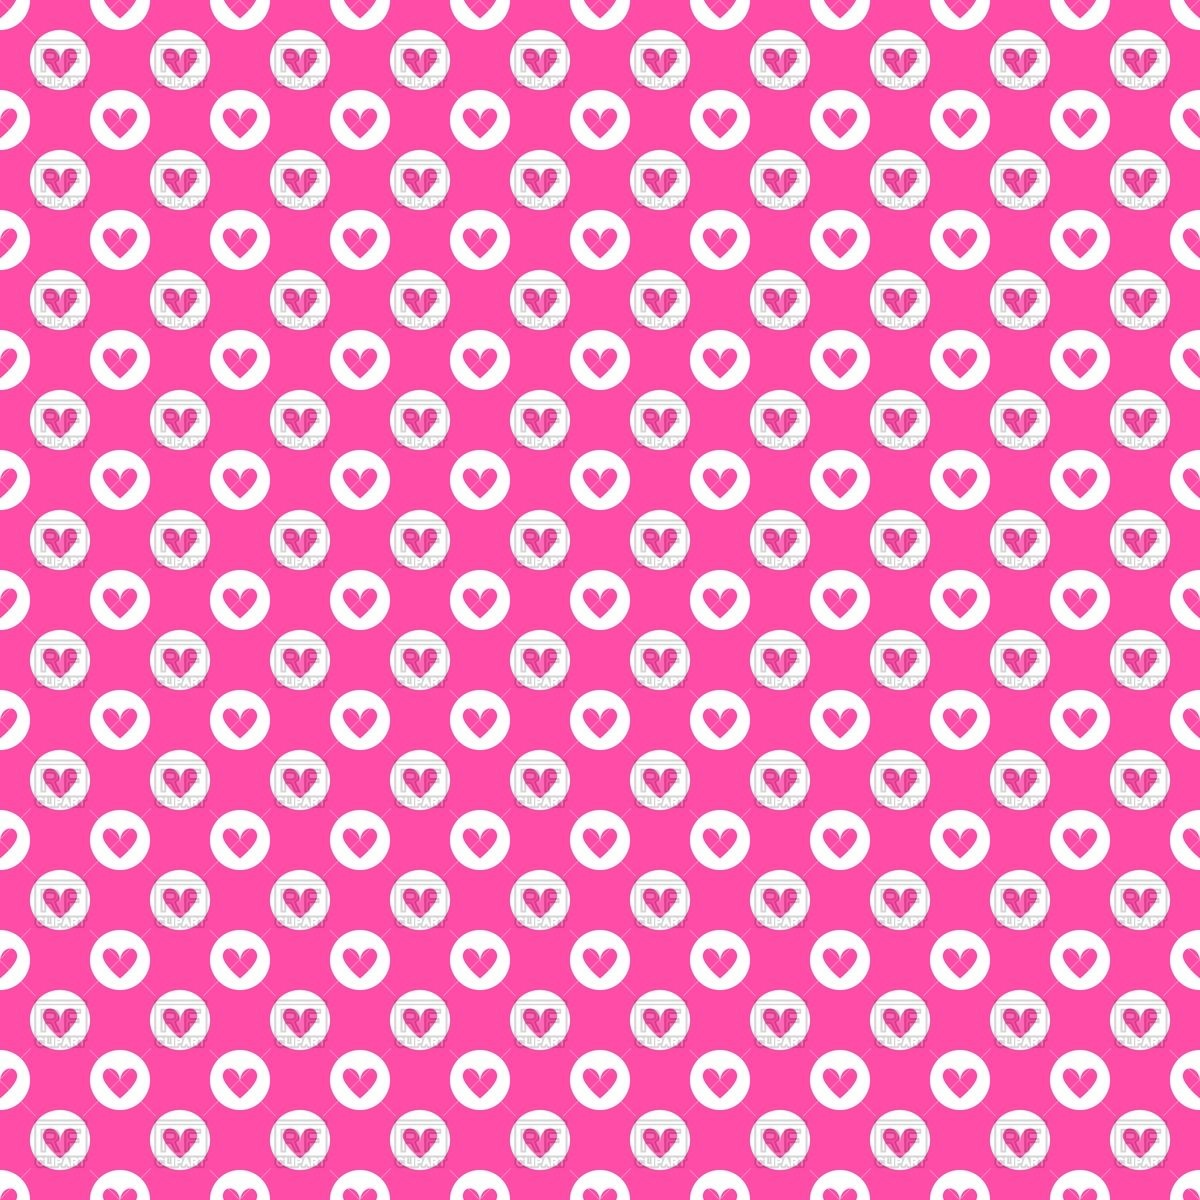 Seamless Wallpaper With Little Hearts In Circles - Vector Graphics - HD Wallpaper 